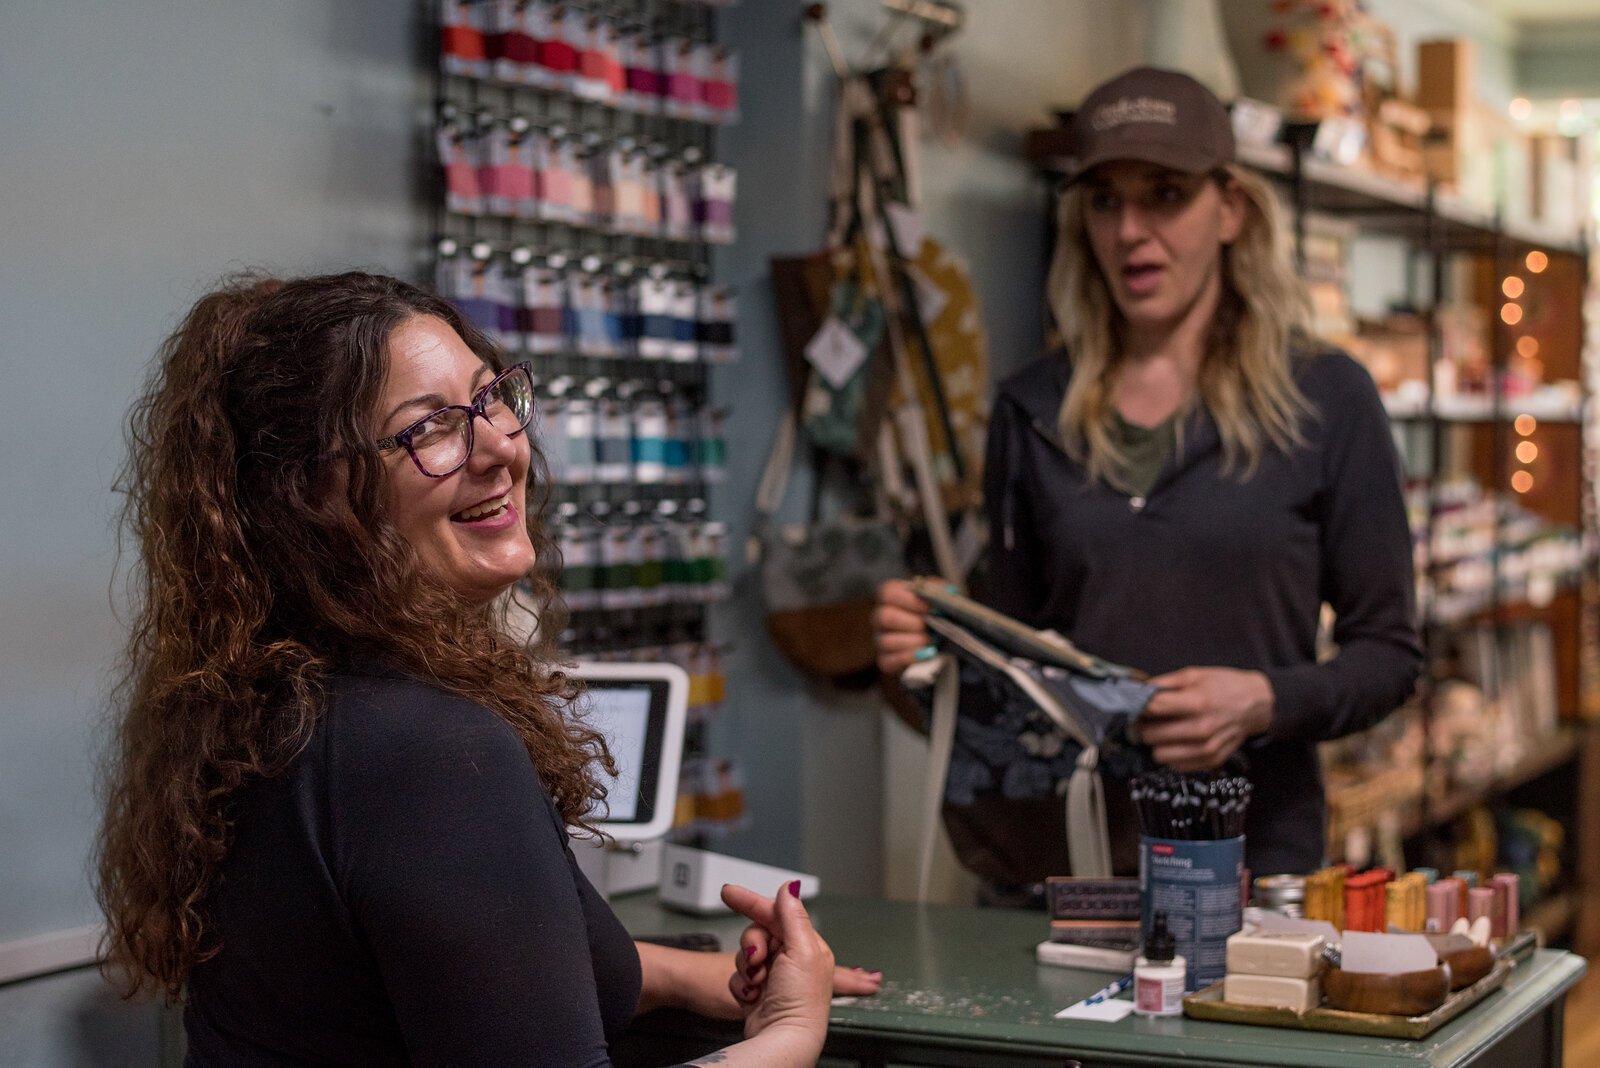 Rebecca Macleery, owner of Kalamazoo Dry Goods, and sister Jennifer Faketty, owner of Confections with Conviction, frequently visit  each other's stores.